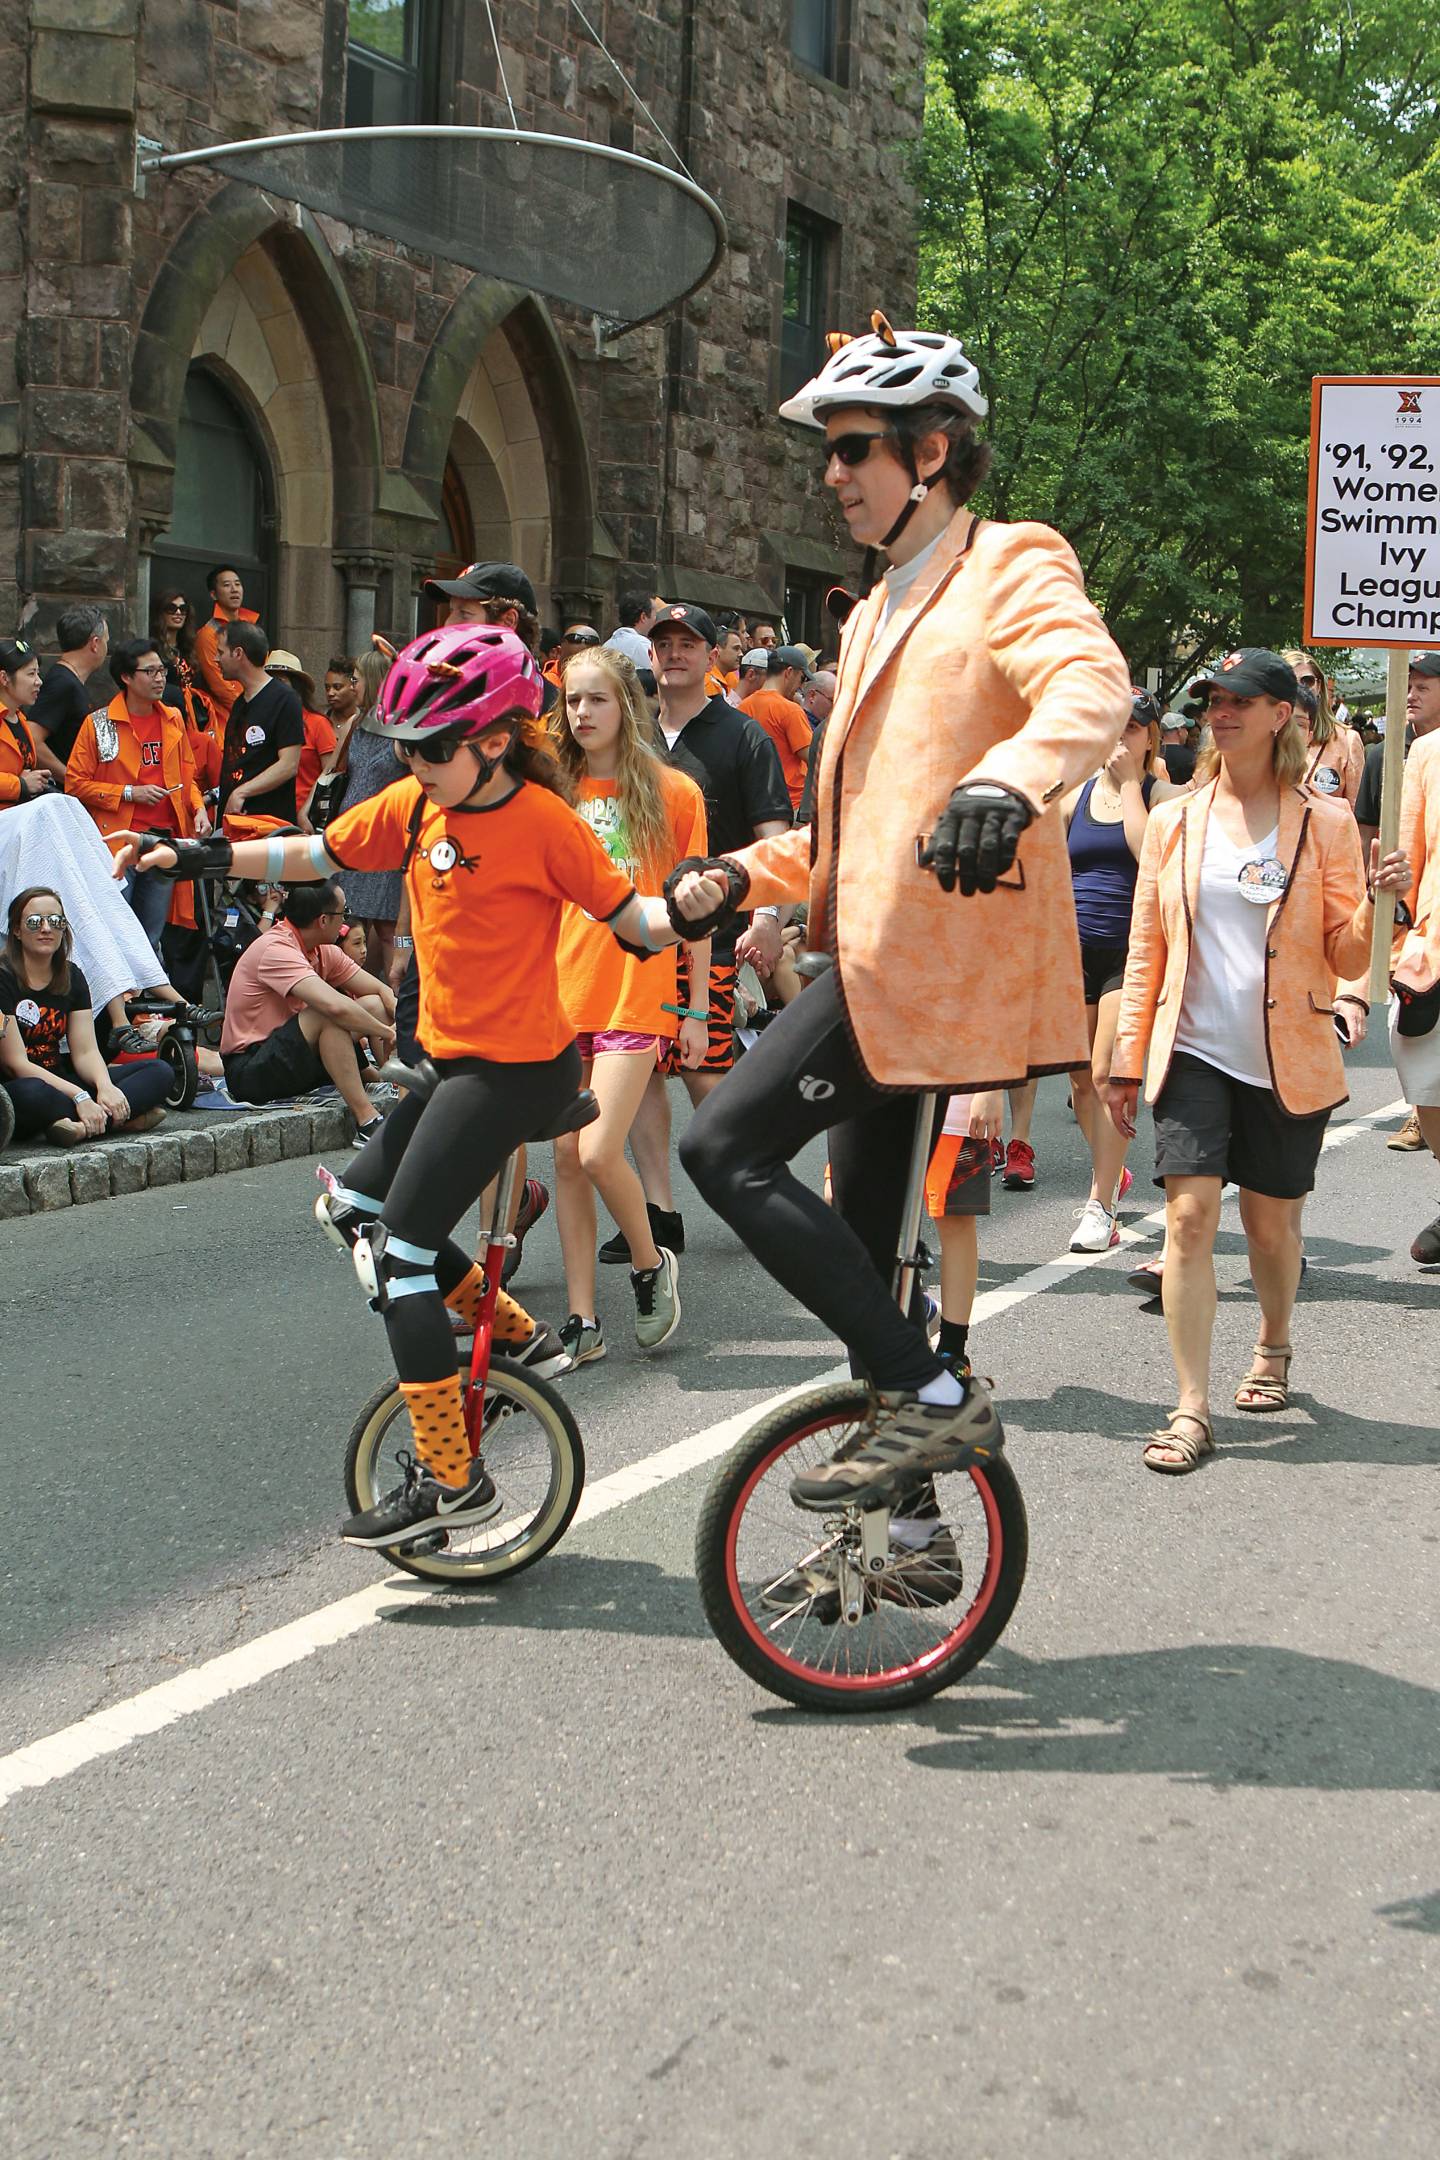 Steven Gubser on a unicycle at P-rade